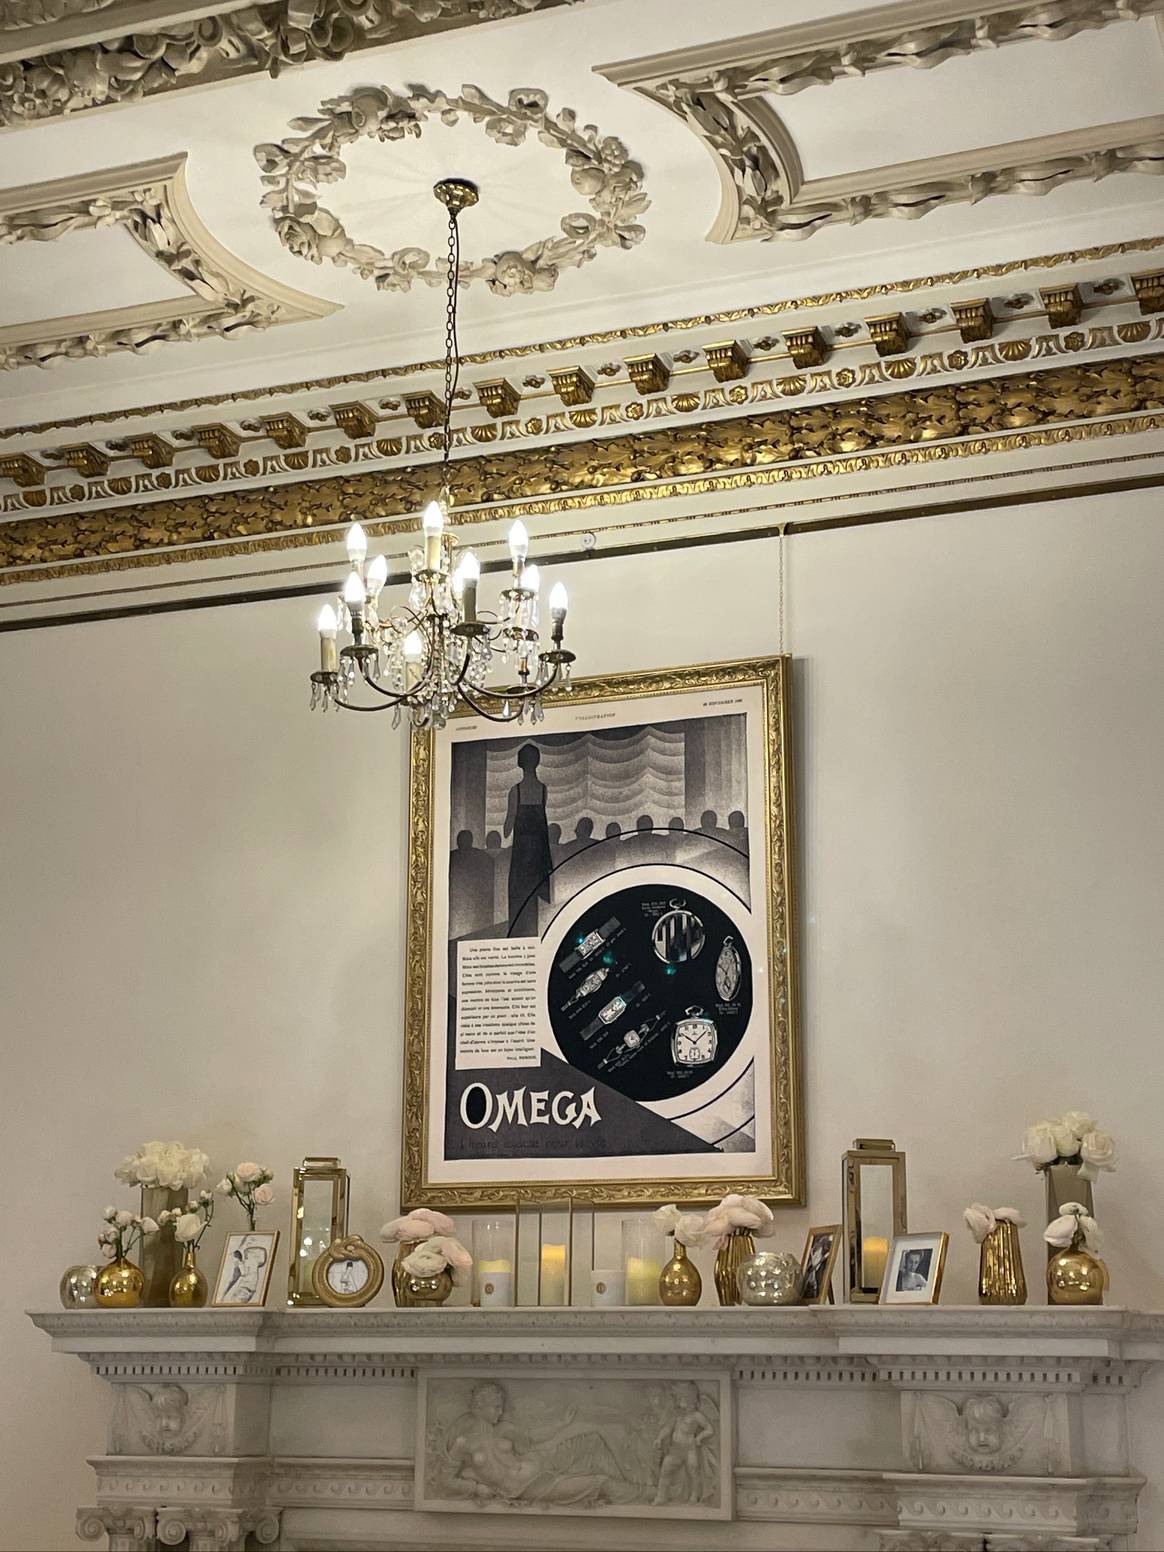 Image: Omega 'Her Time' London exhibition